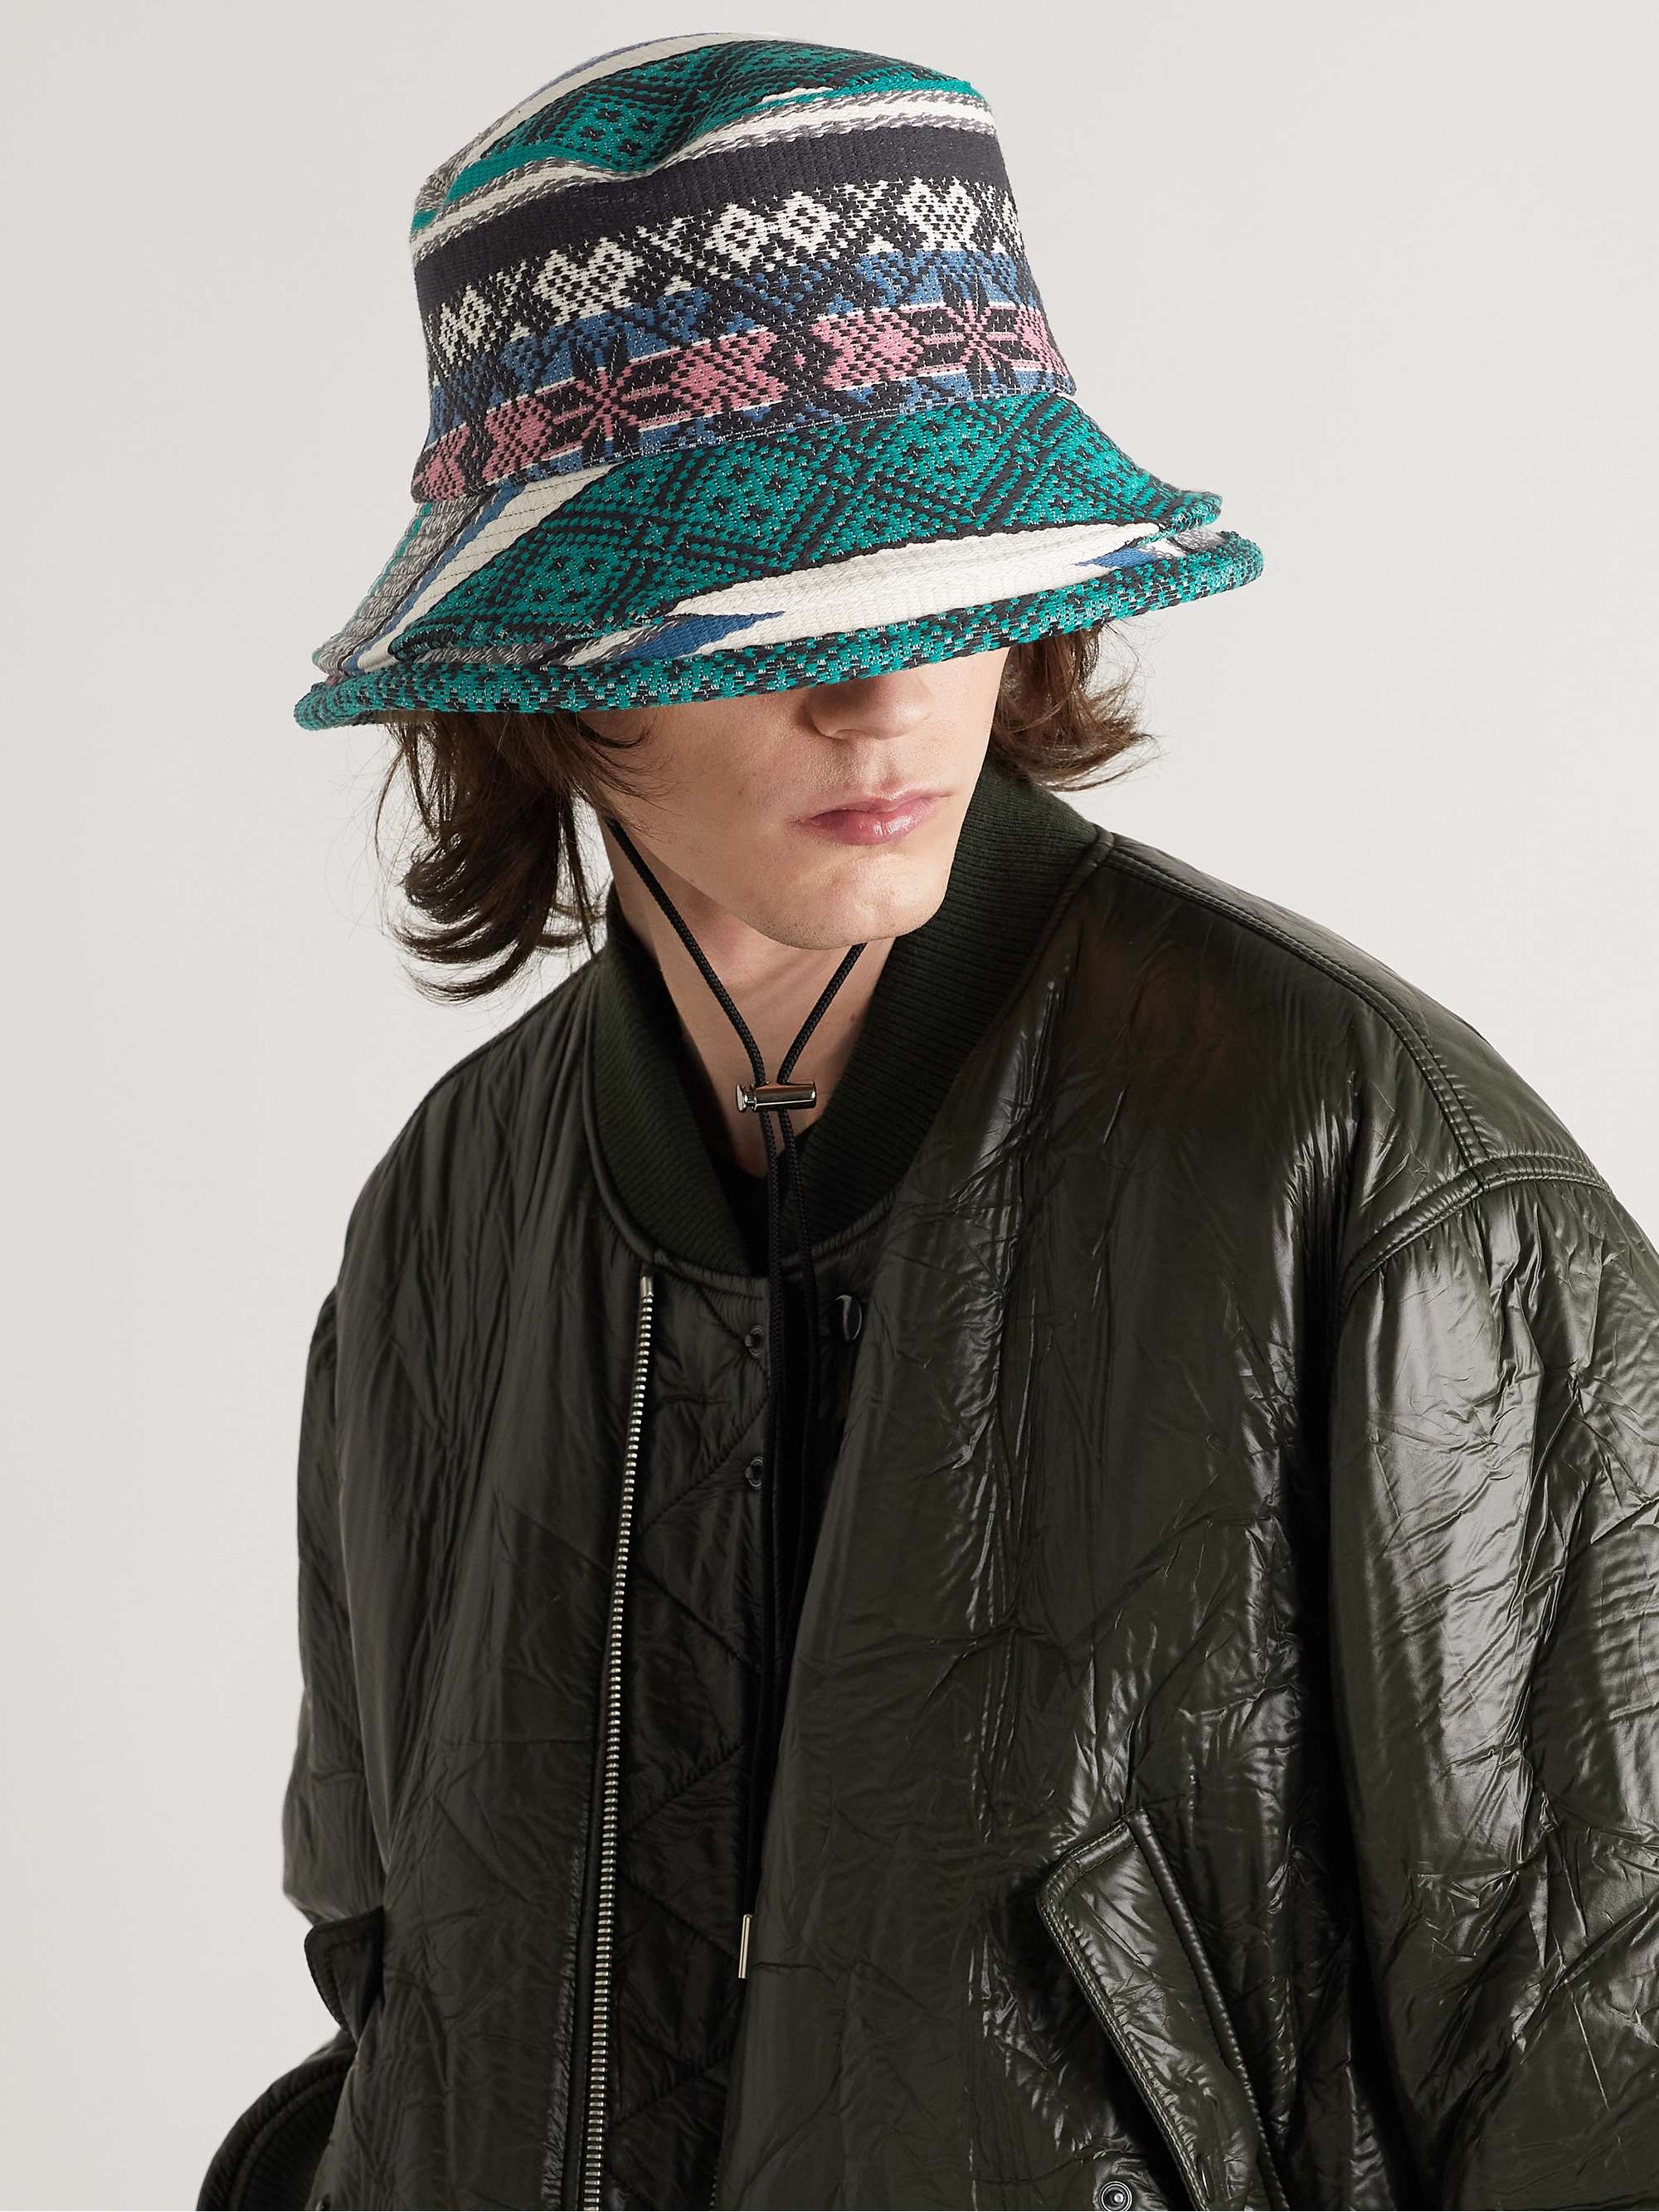 Green + Paula's Ibiza Leather-Trimmed Cotton-Canvas Bucket Hat 